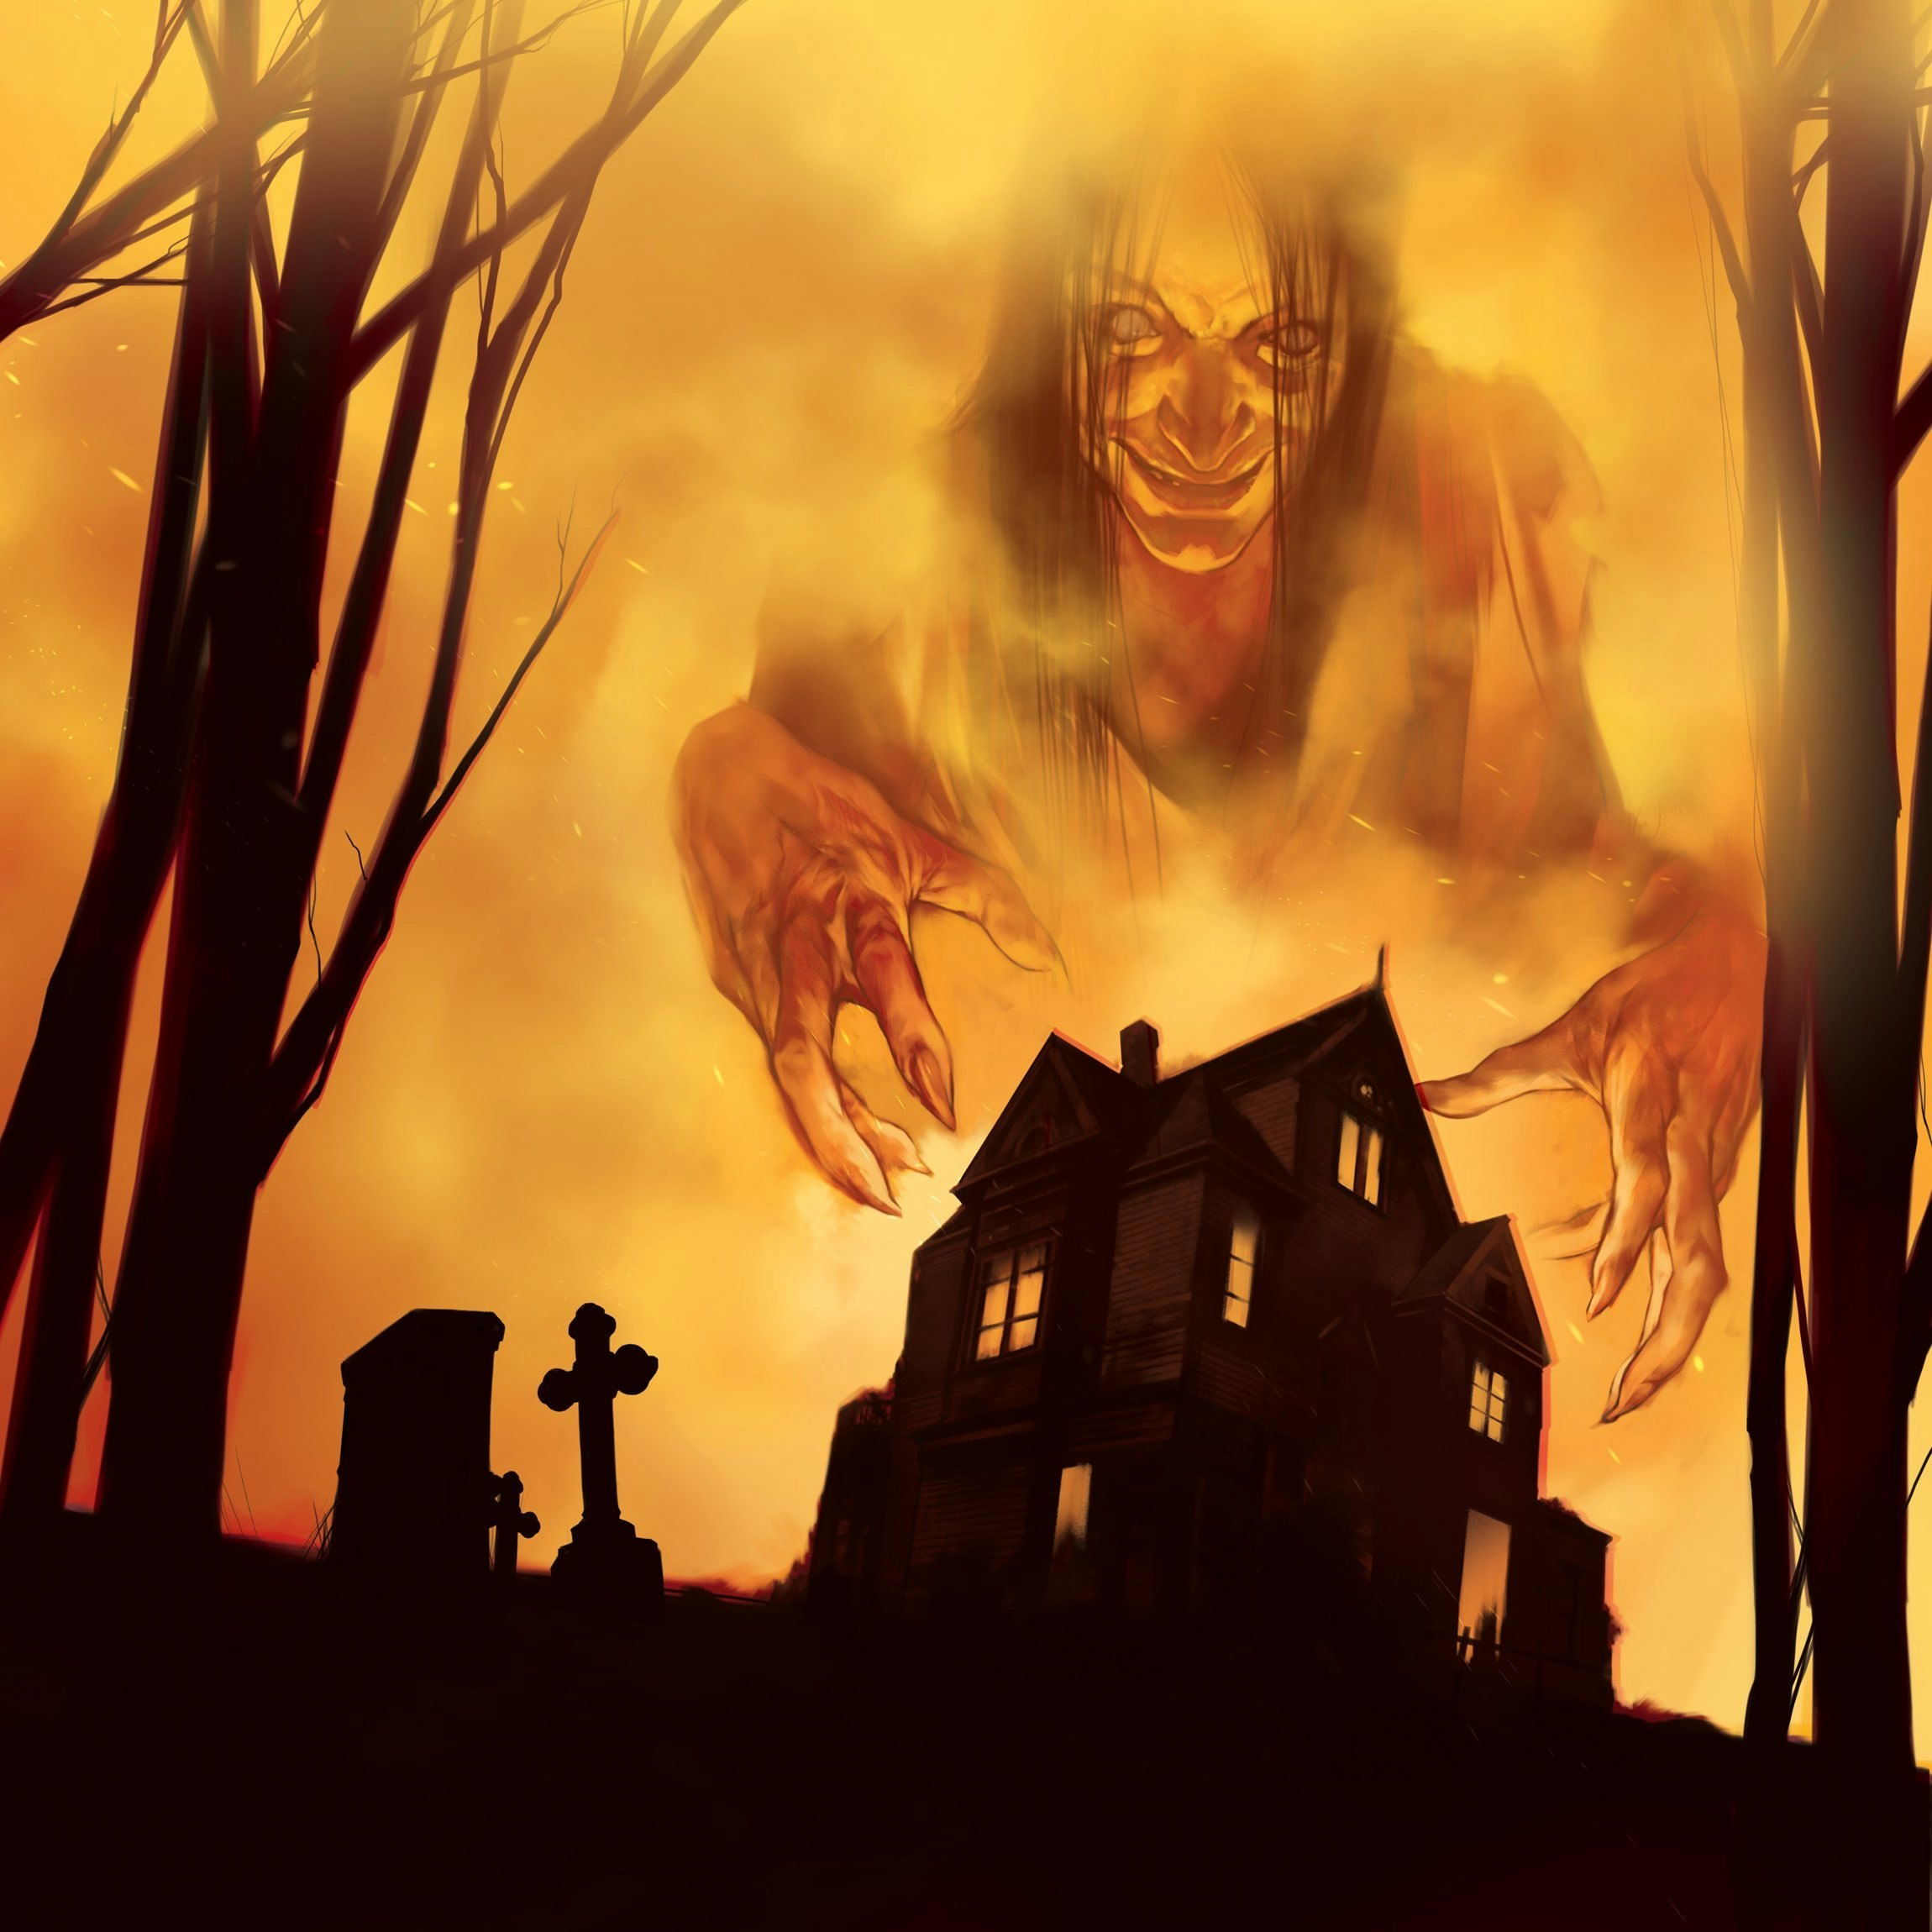 betrayal at house on haunted hill expansion